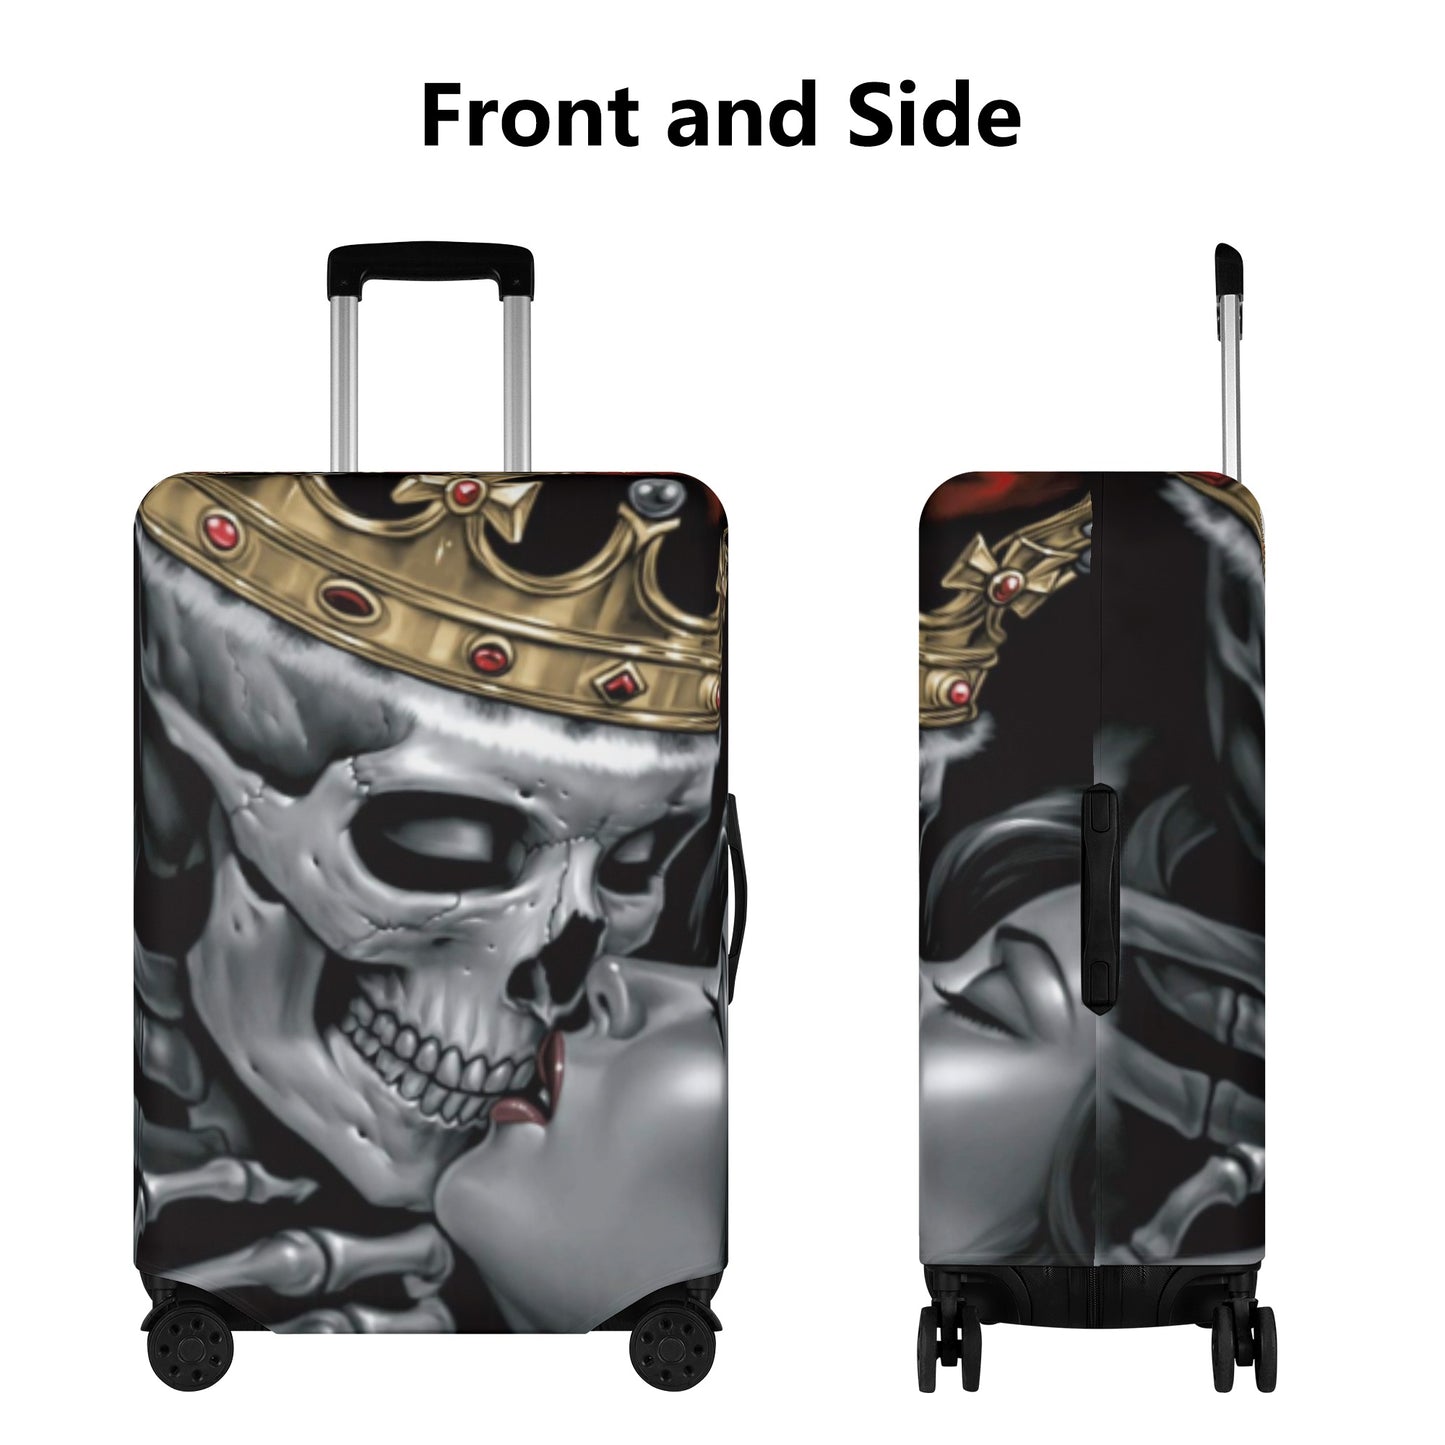 Gothic KING & QUEEN skull luggage suitcase cover